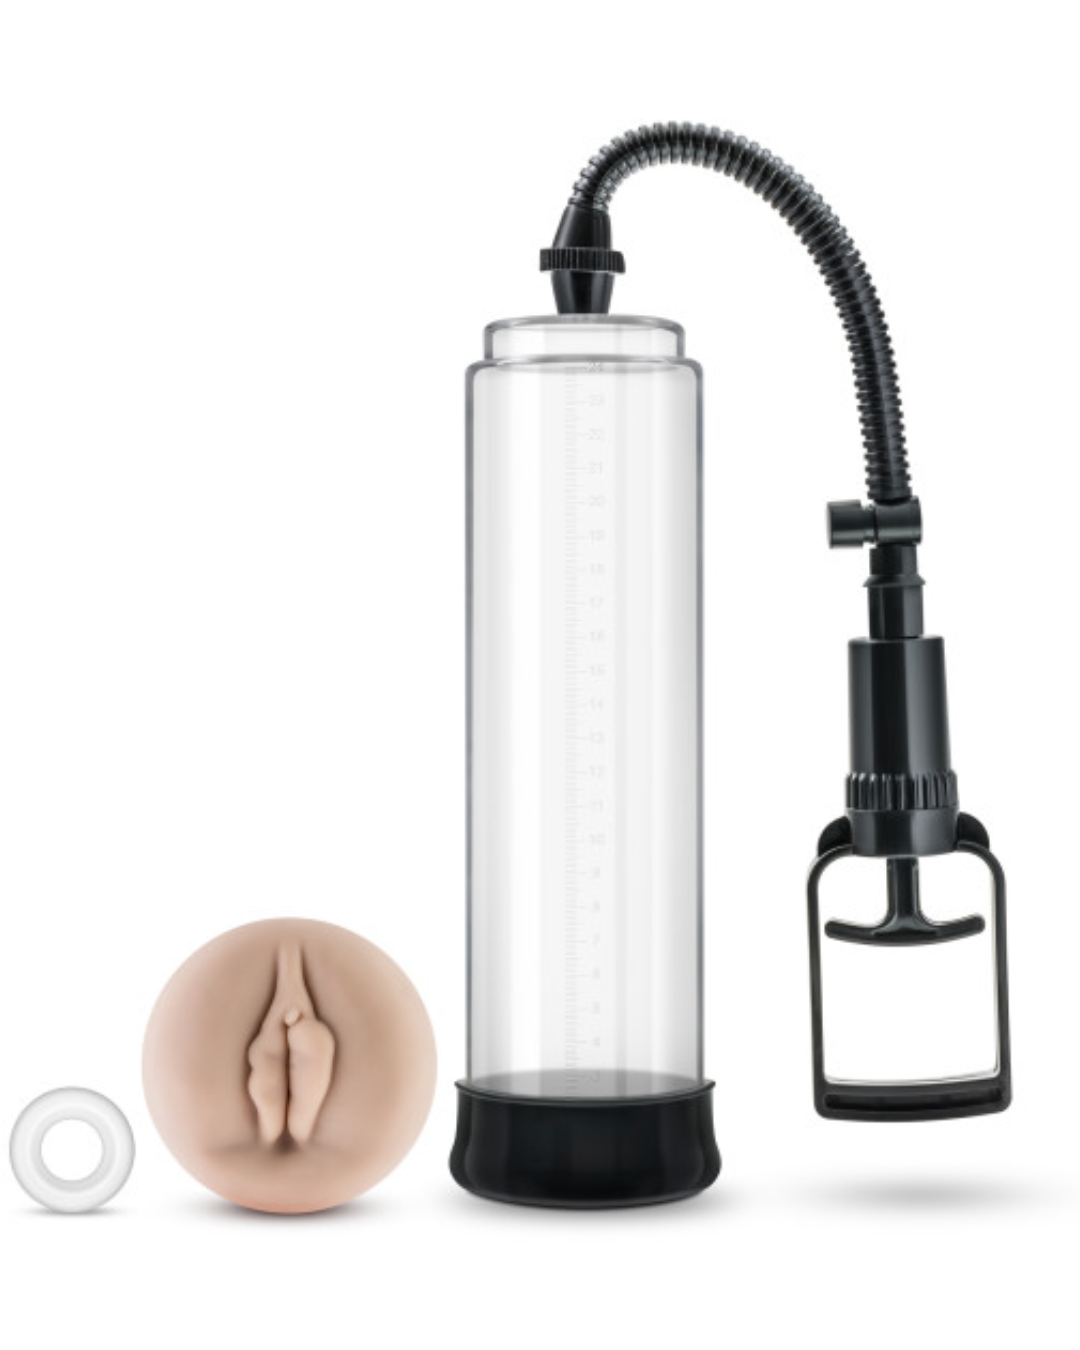 Performance Male Enhancement Penis Pump System with Realistic Sleeve